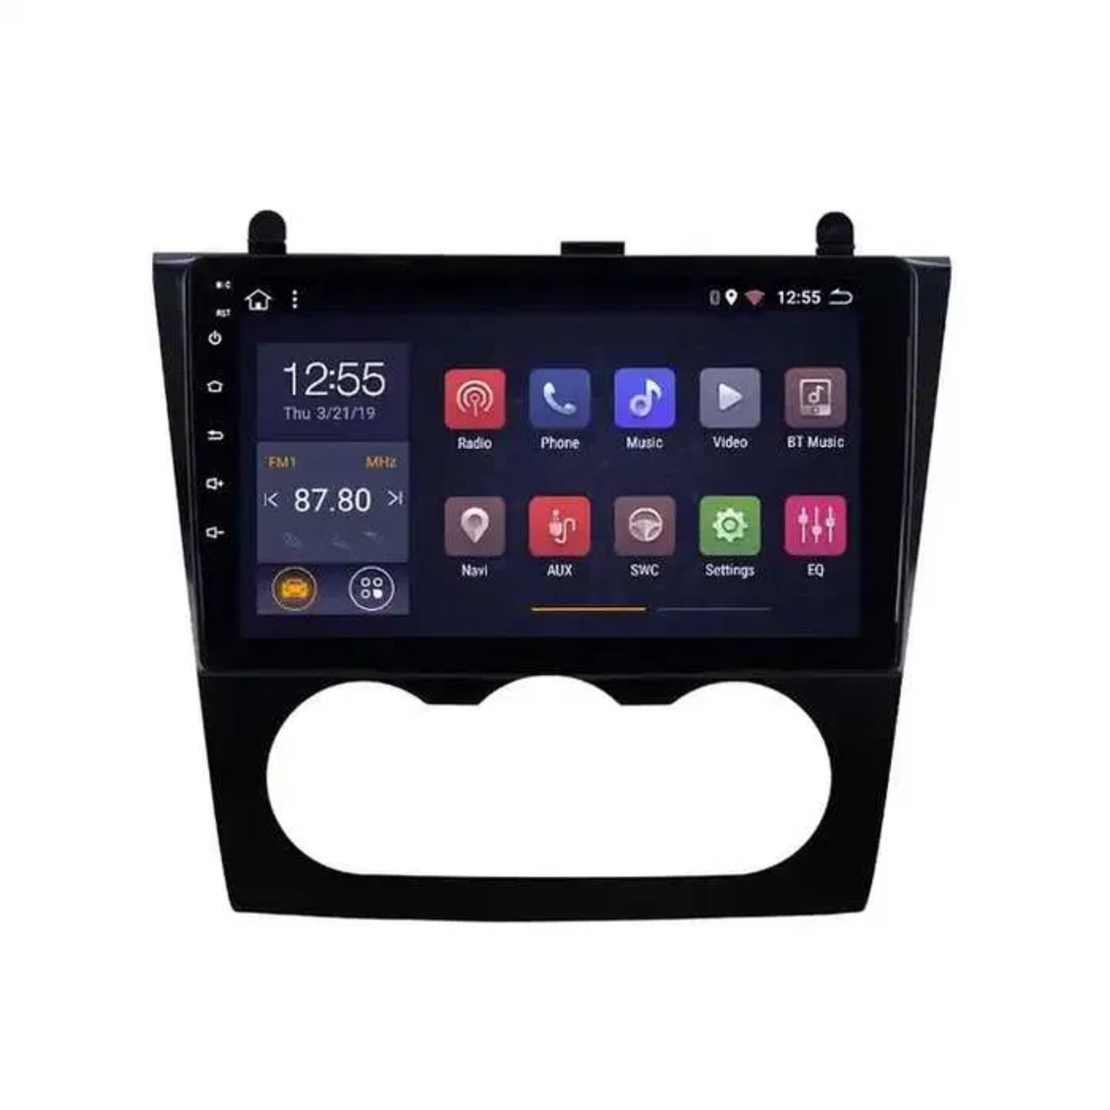 Nissan Altima 2006- 2012 Android Multimedia/Navigation AC